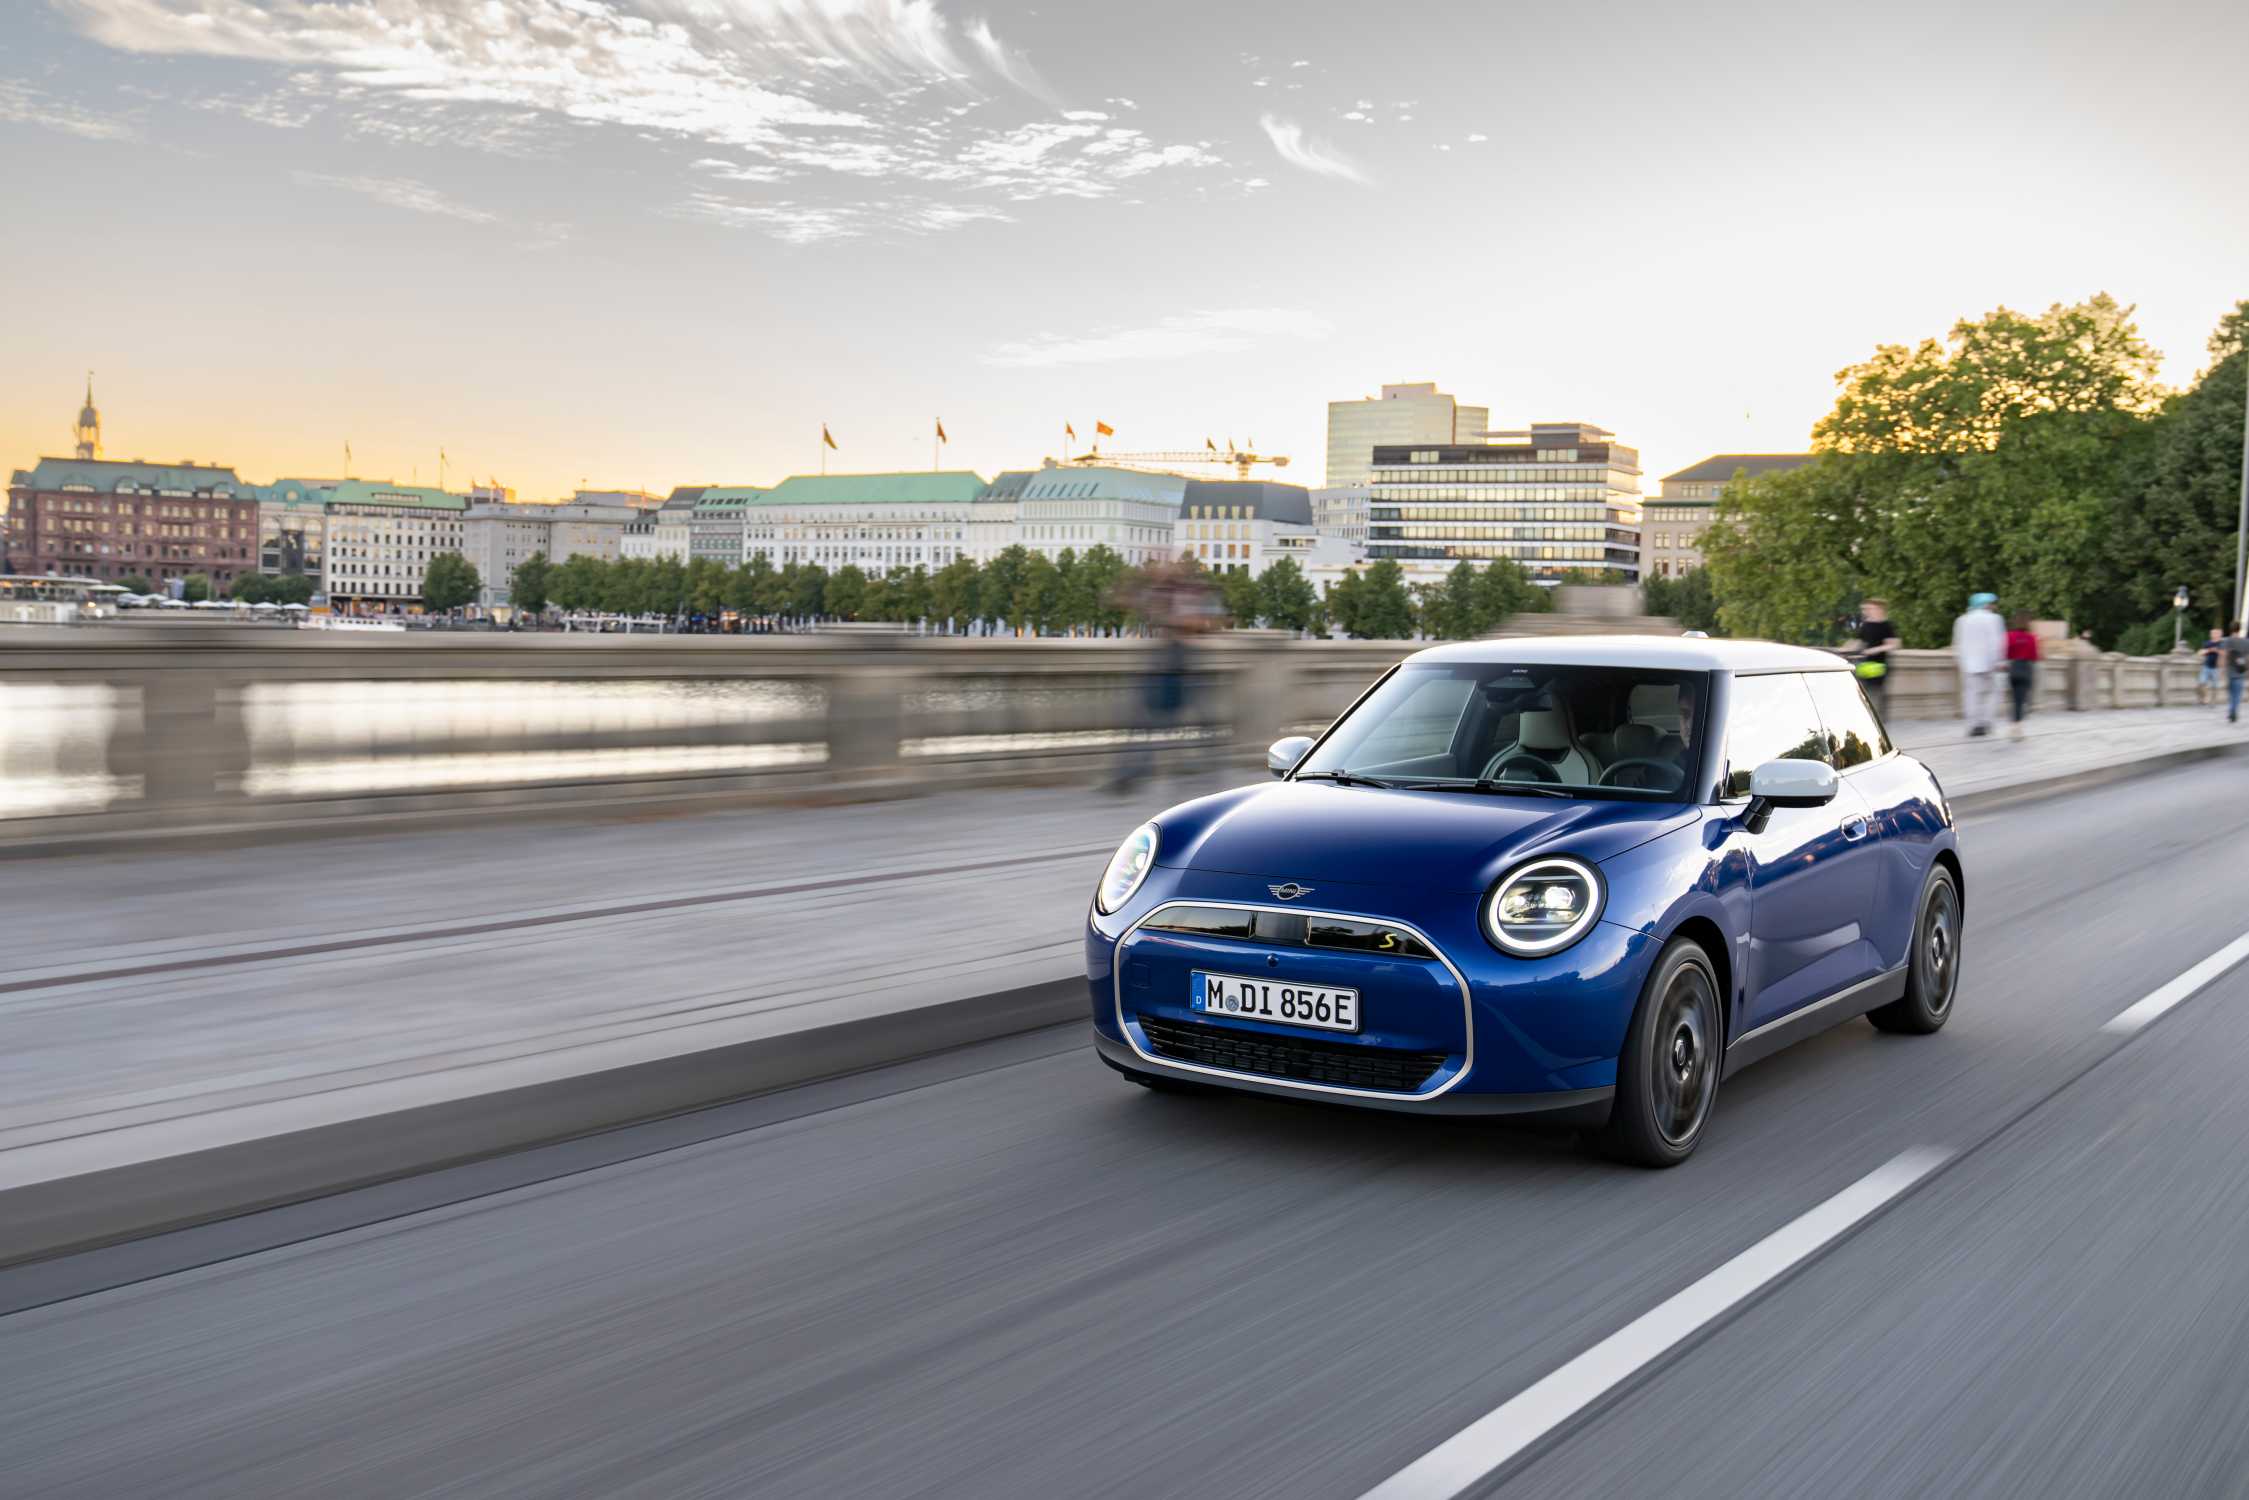 Can New Electric Minis Make Brand Relevant Again In EV Market?